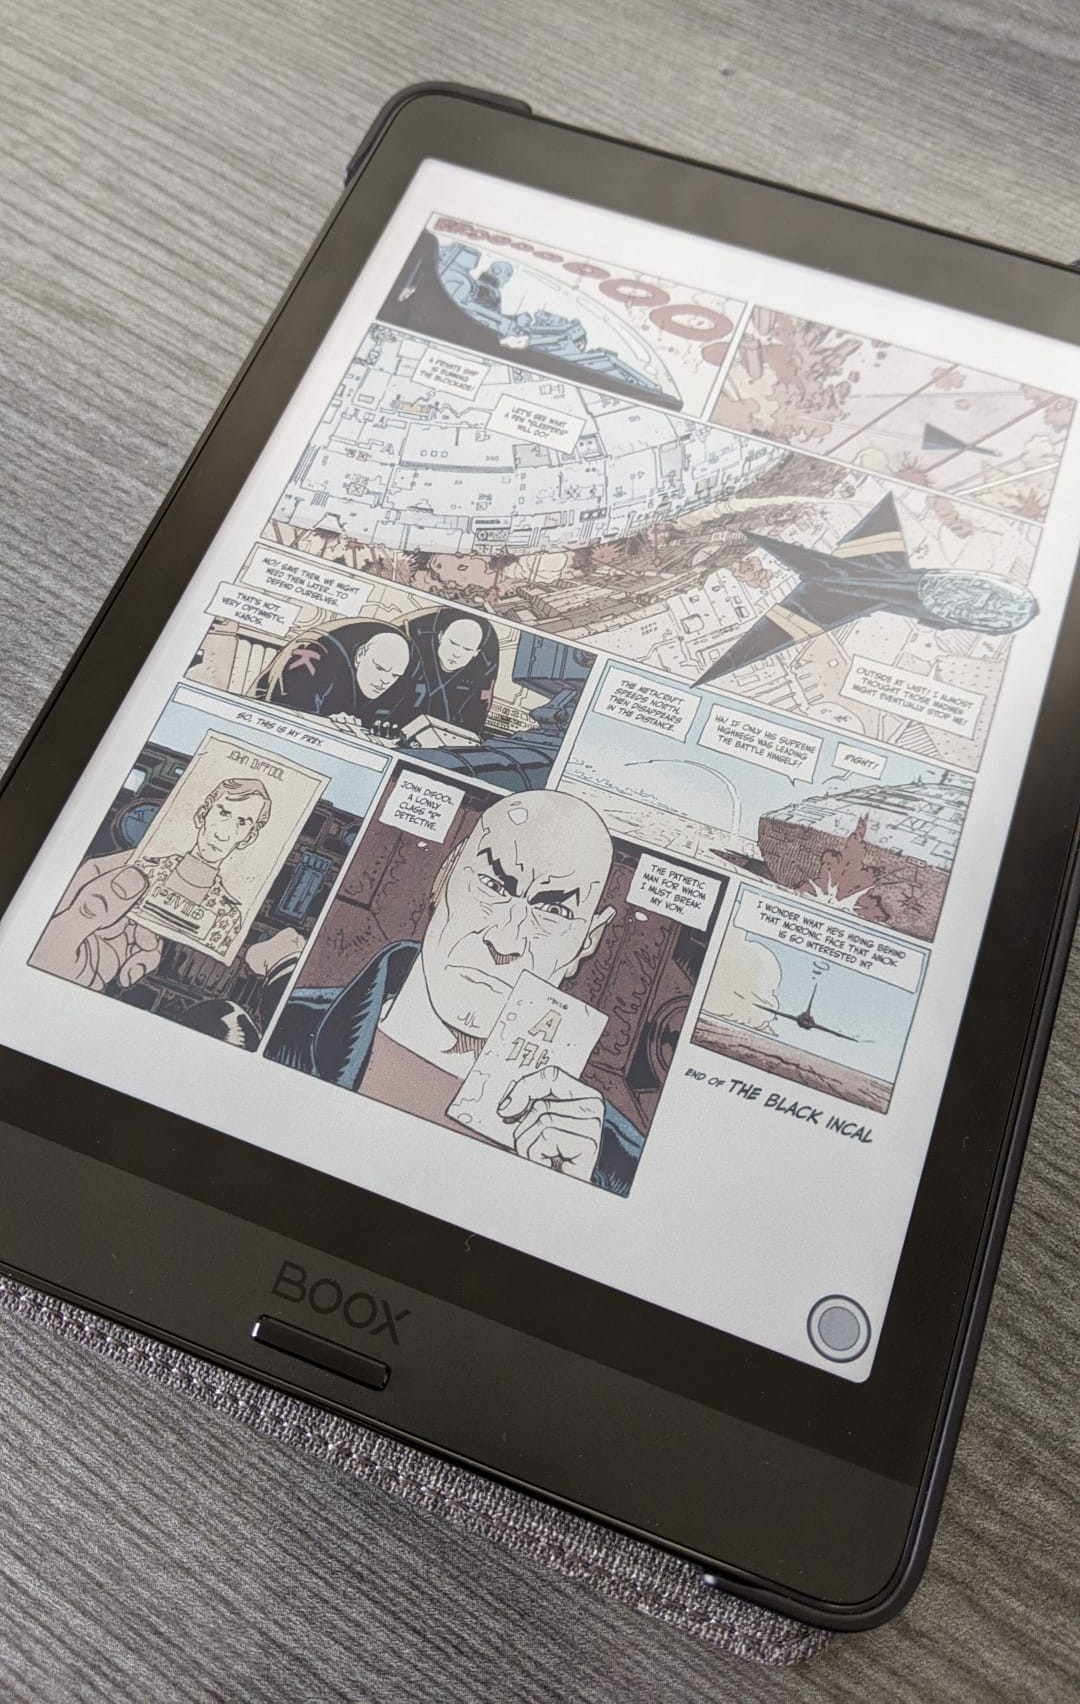 My brief experience with the ONYX BOOX Nova 3 Color eReader